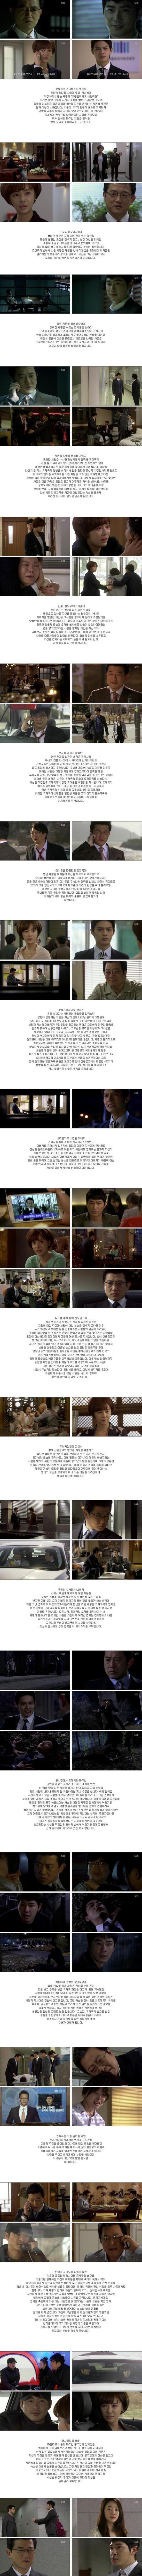 episodes 21 and 22 captures for the Korean drama 'Incarnation of Money'